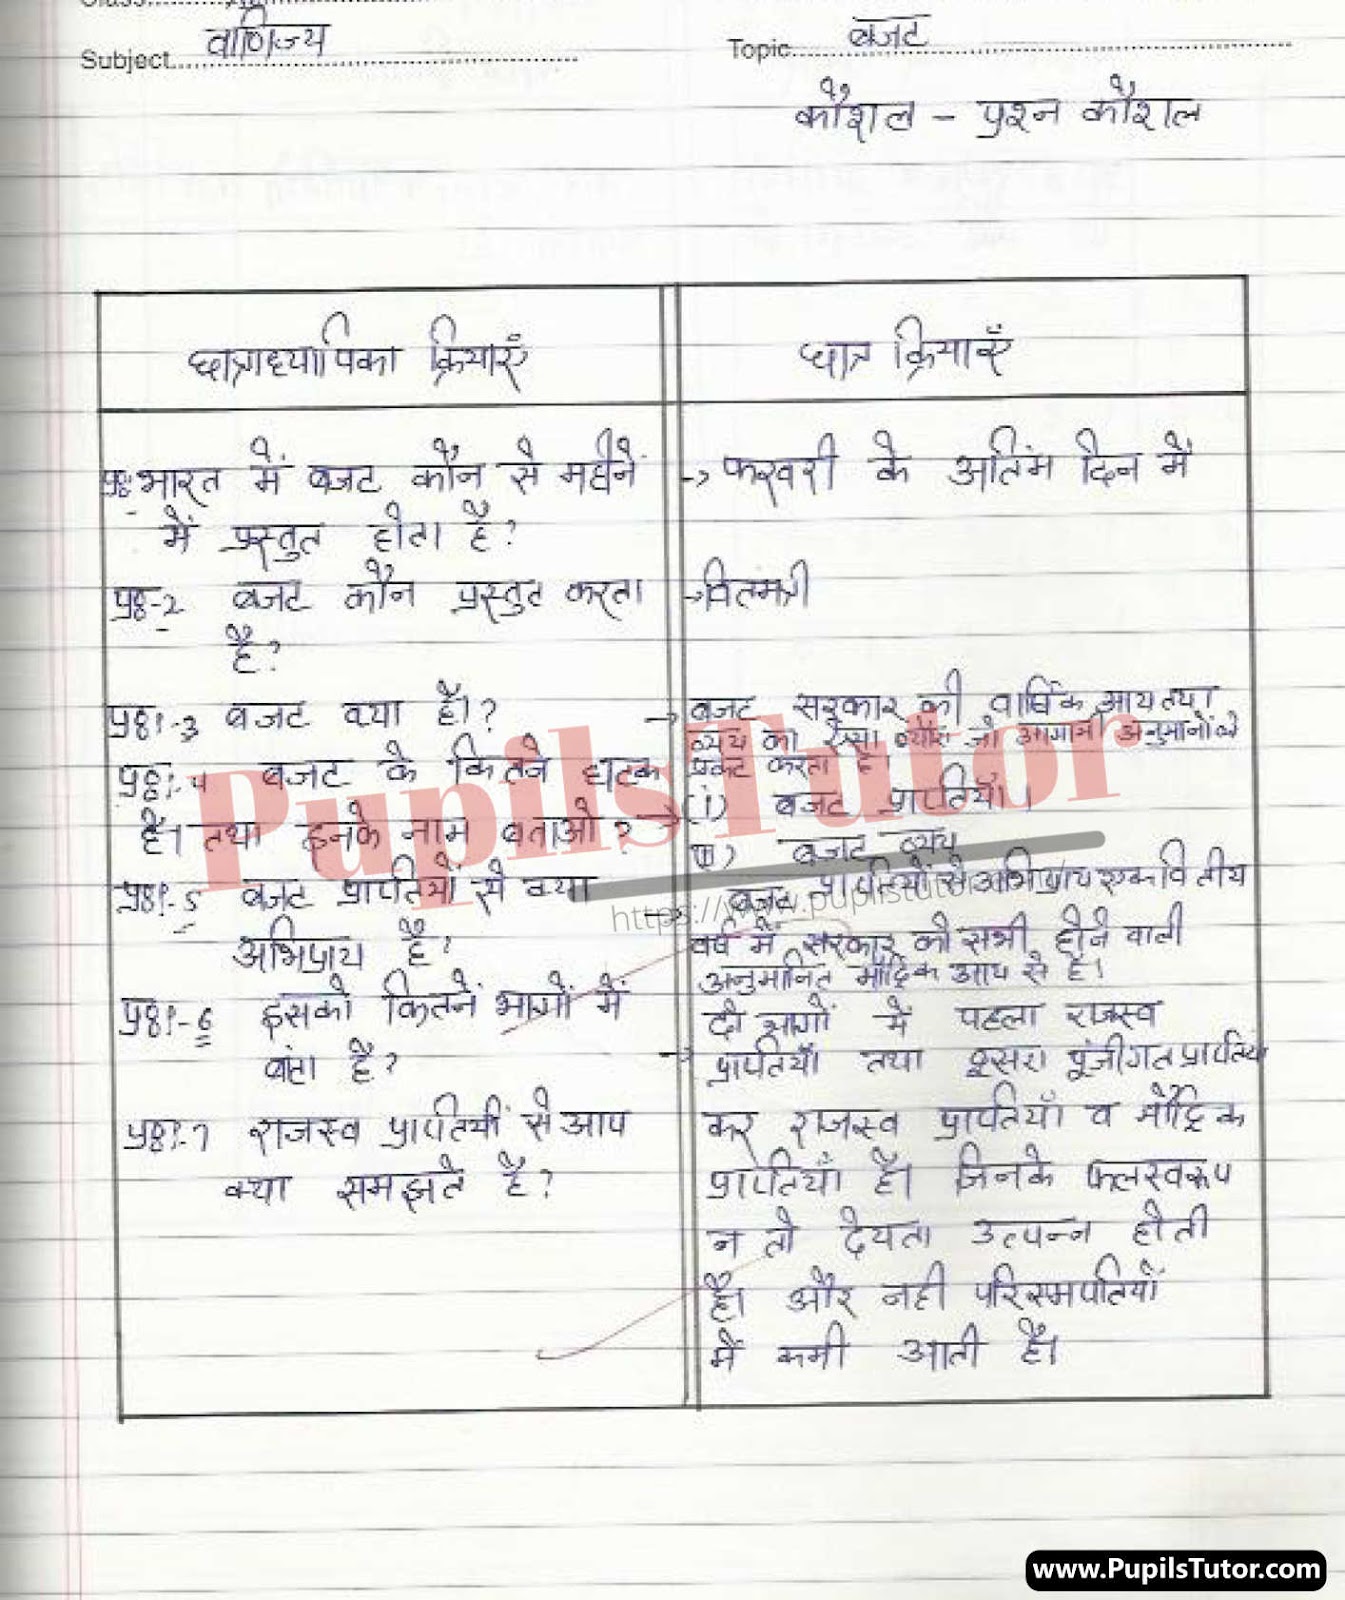 Budget Lesson Plan | Budget Lesson Plan In Hindi For Class 12 – (Page And Image Number 1) – Pupils Tutor